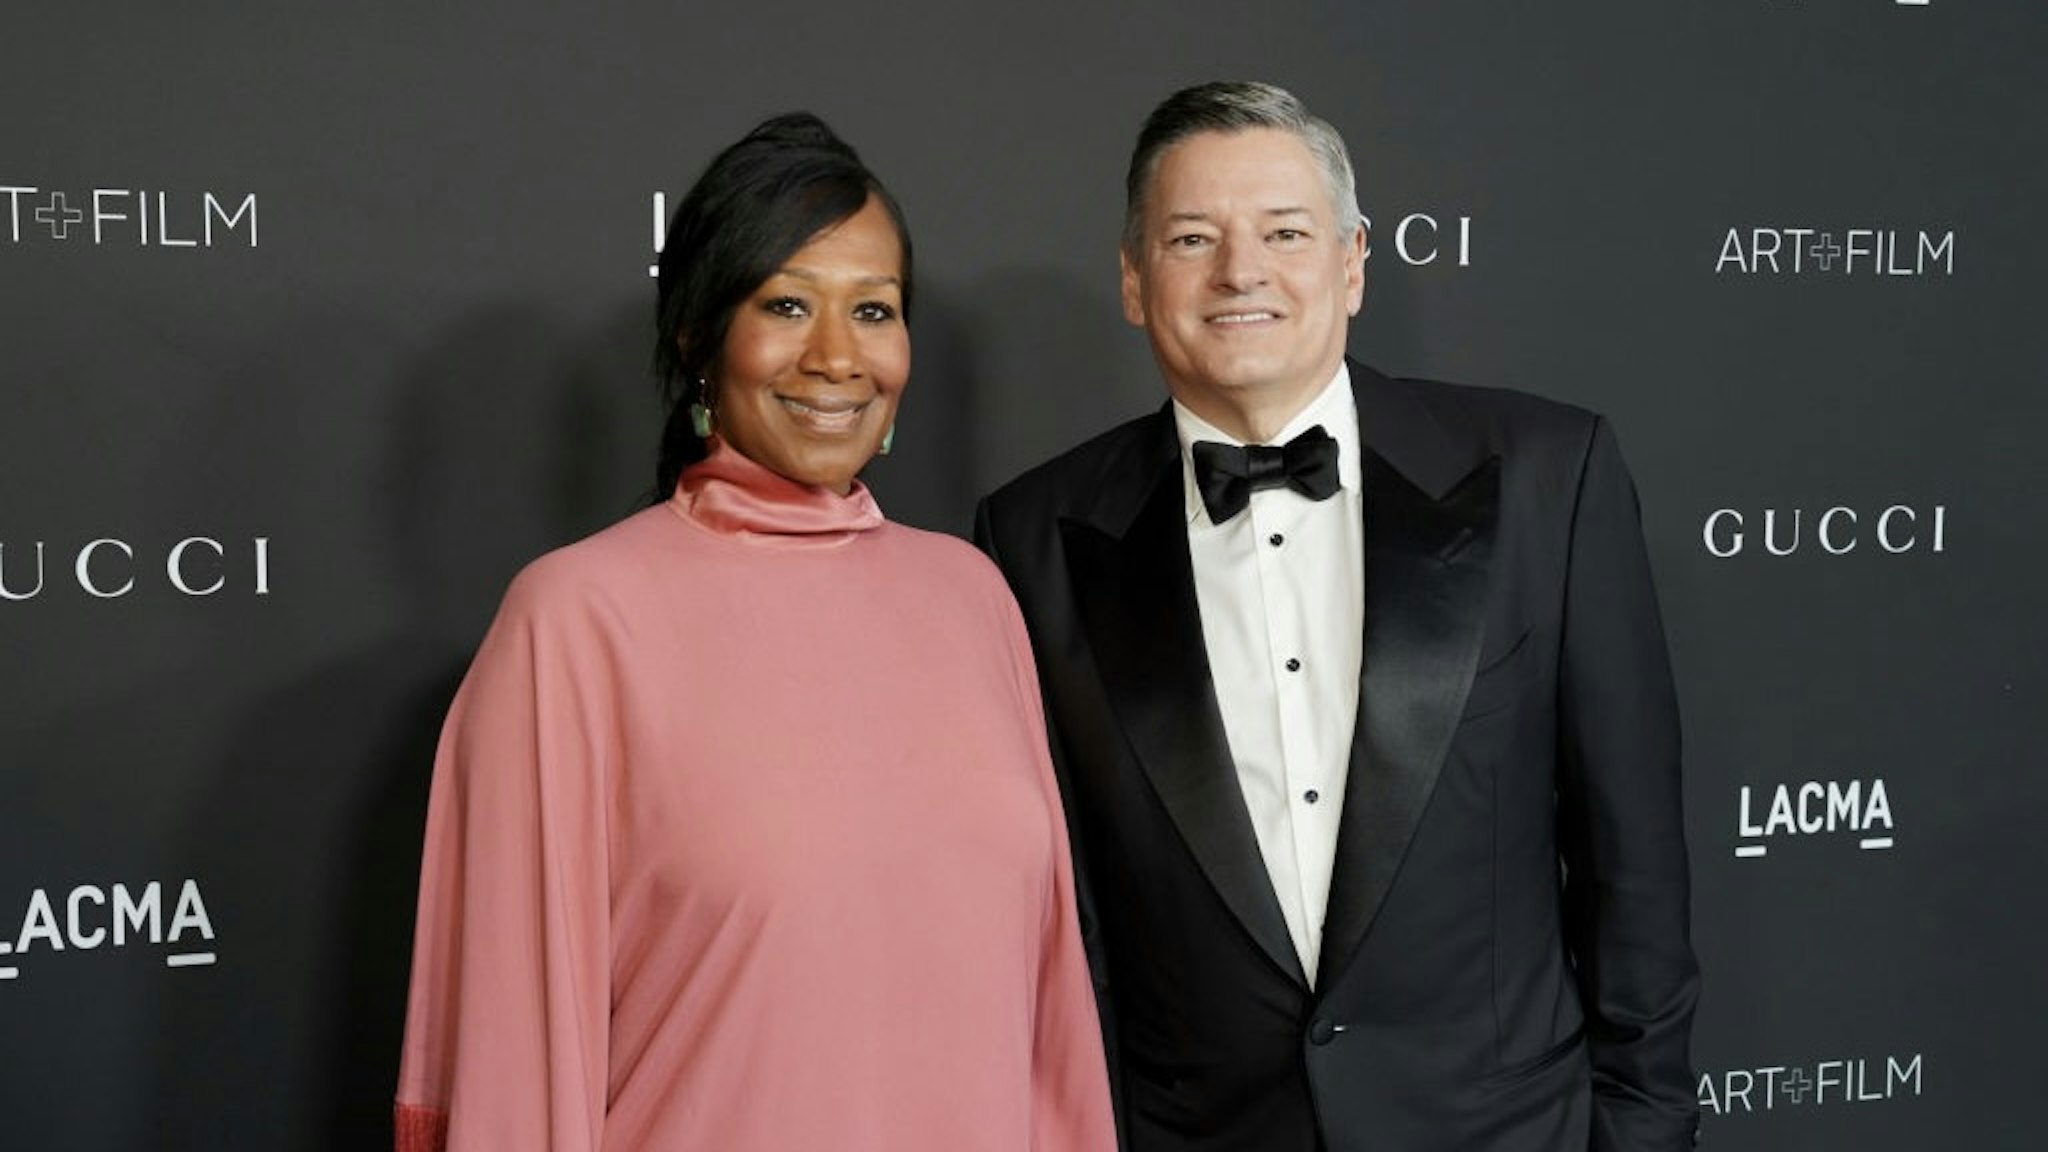 10th Annual LACMA ART+FILM GALA Honoring Amy Sherald, Kehinde Wiley, And Steven Spielberg Presented By Gucci - Red Carpet LOS ANGELES, CALIFORNIA - NOVEMBER 06: (L-R) Nicole Avant and Ted Sarandos attend the 10th Annual LACMA ART+FILM GALA honoring Amy Sherald, Kehinde Wiley, and Steven Spielberg presented by Gucci at Los Angeles County Museum of Art on November 06, 2021 in Los Angeles, California. (Photo by Presley Ann/Getty Images for LACMA) Presley Ann / Stringer via Getty Images